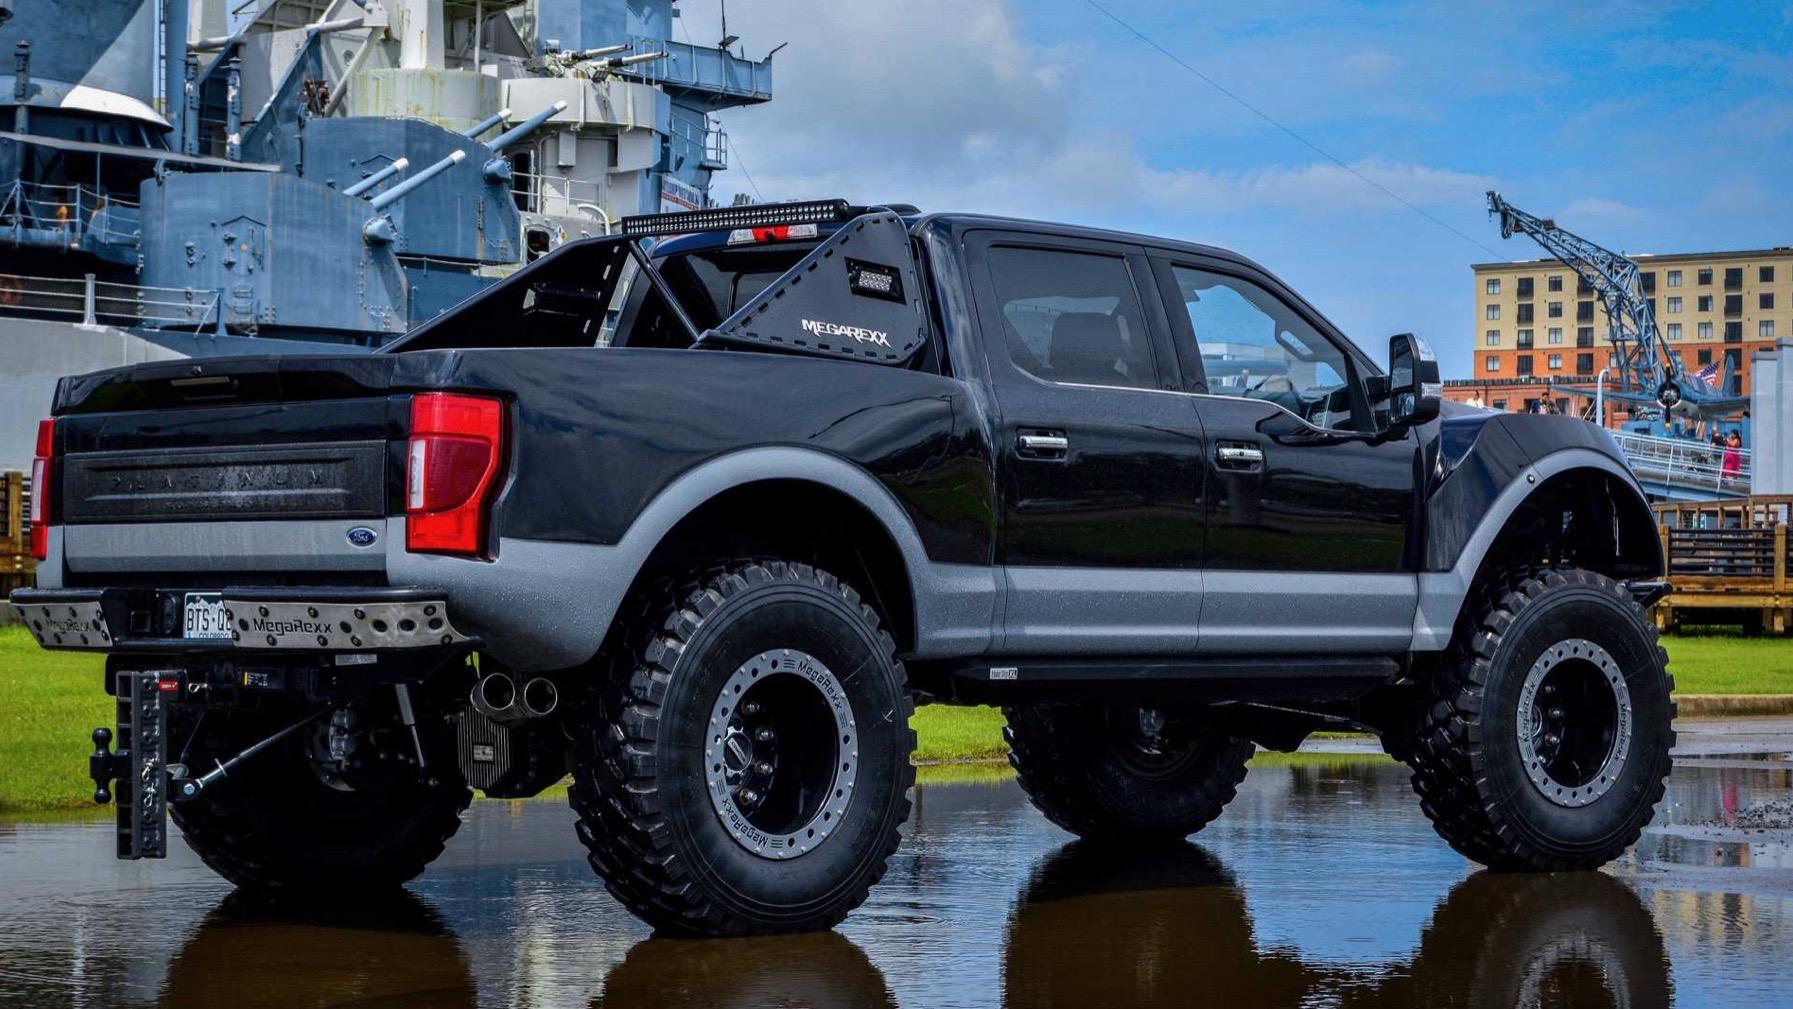 Megarexx Megaraptor is a raptor version of the Ford F 250 Super Duty